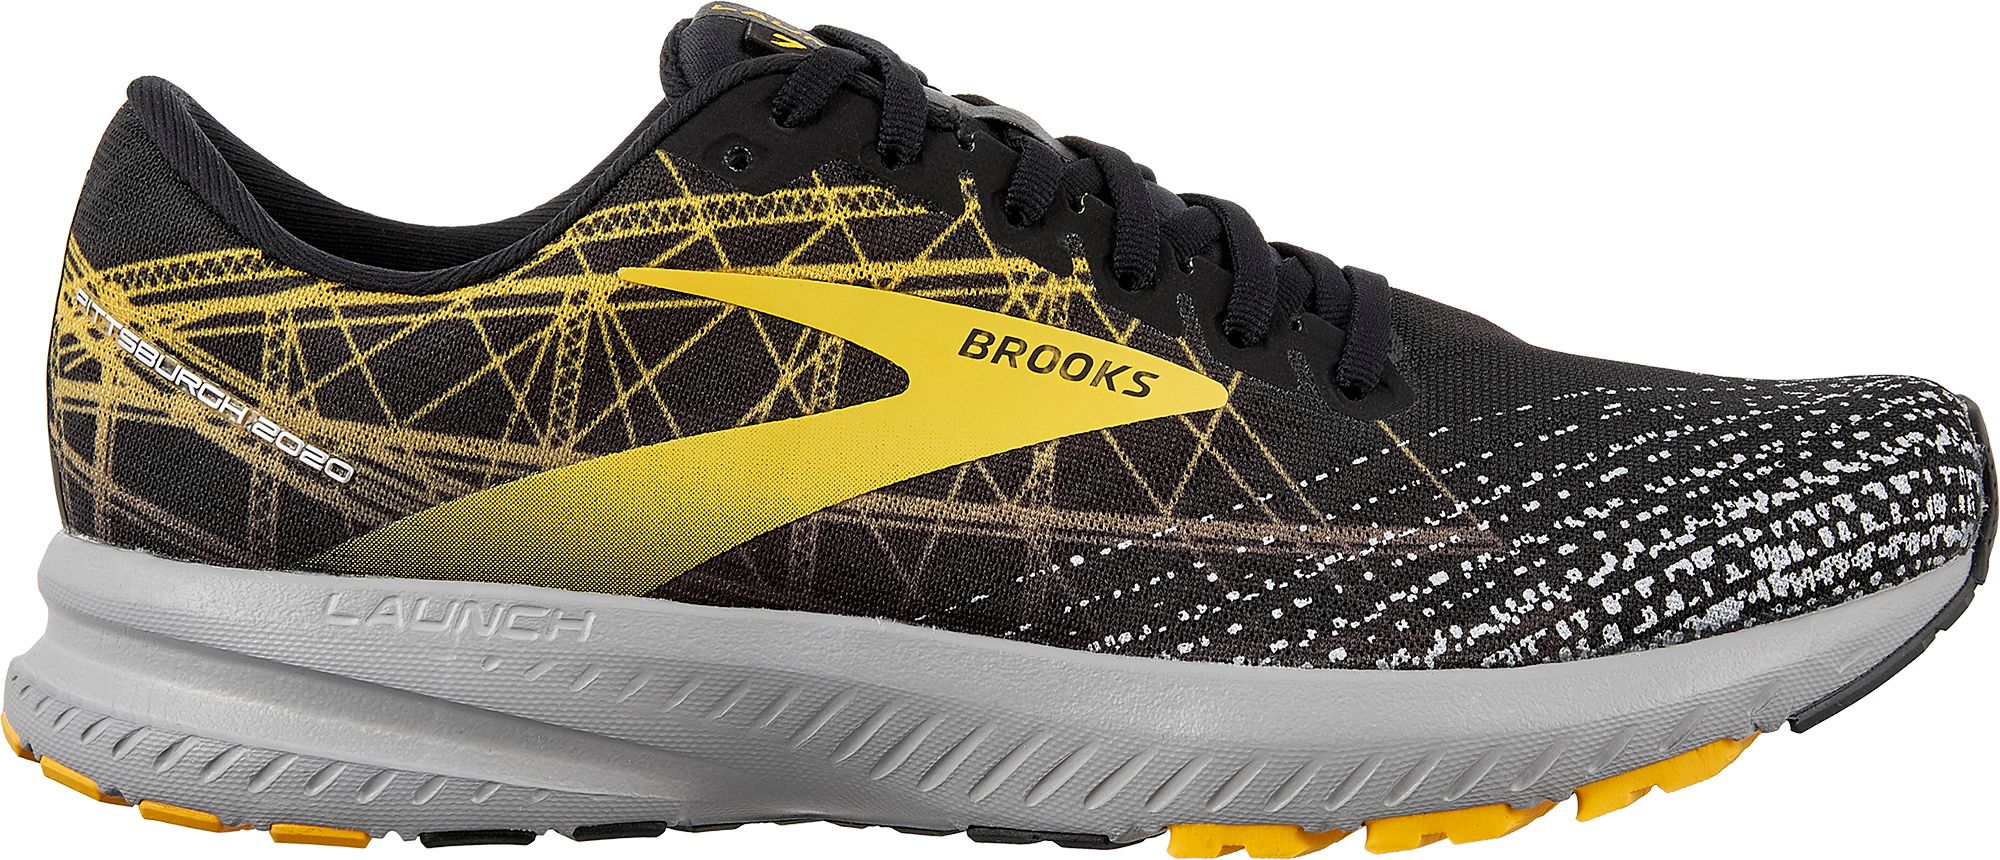 Will the Brooks Pittsburgh Shoes Be Cheaper Tomorrow?